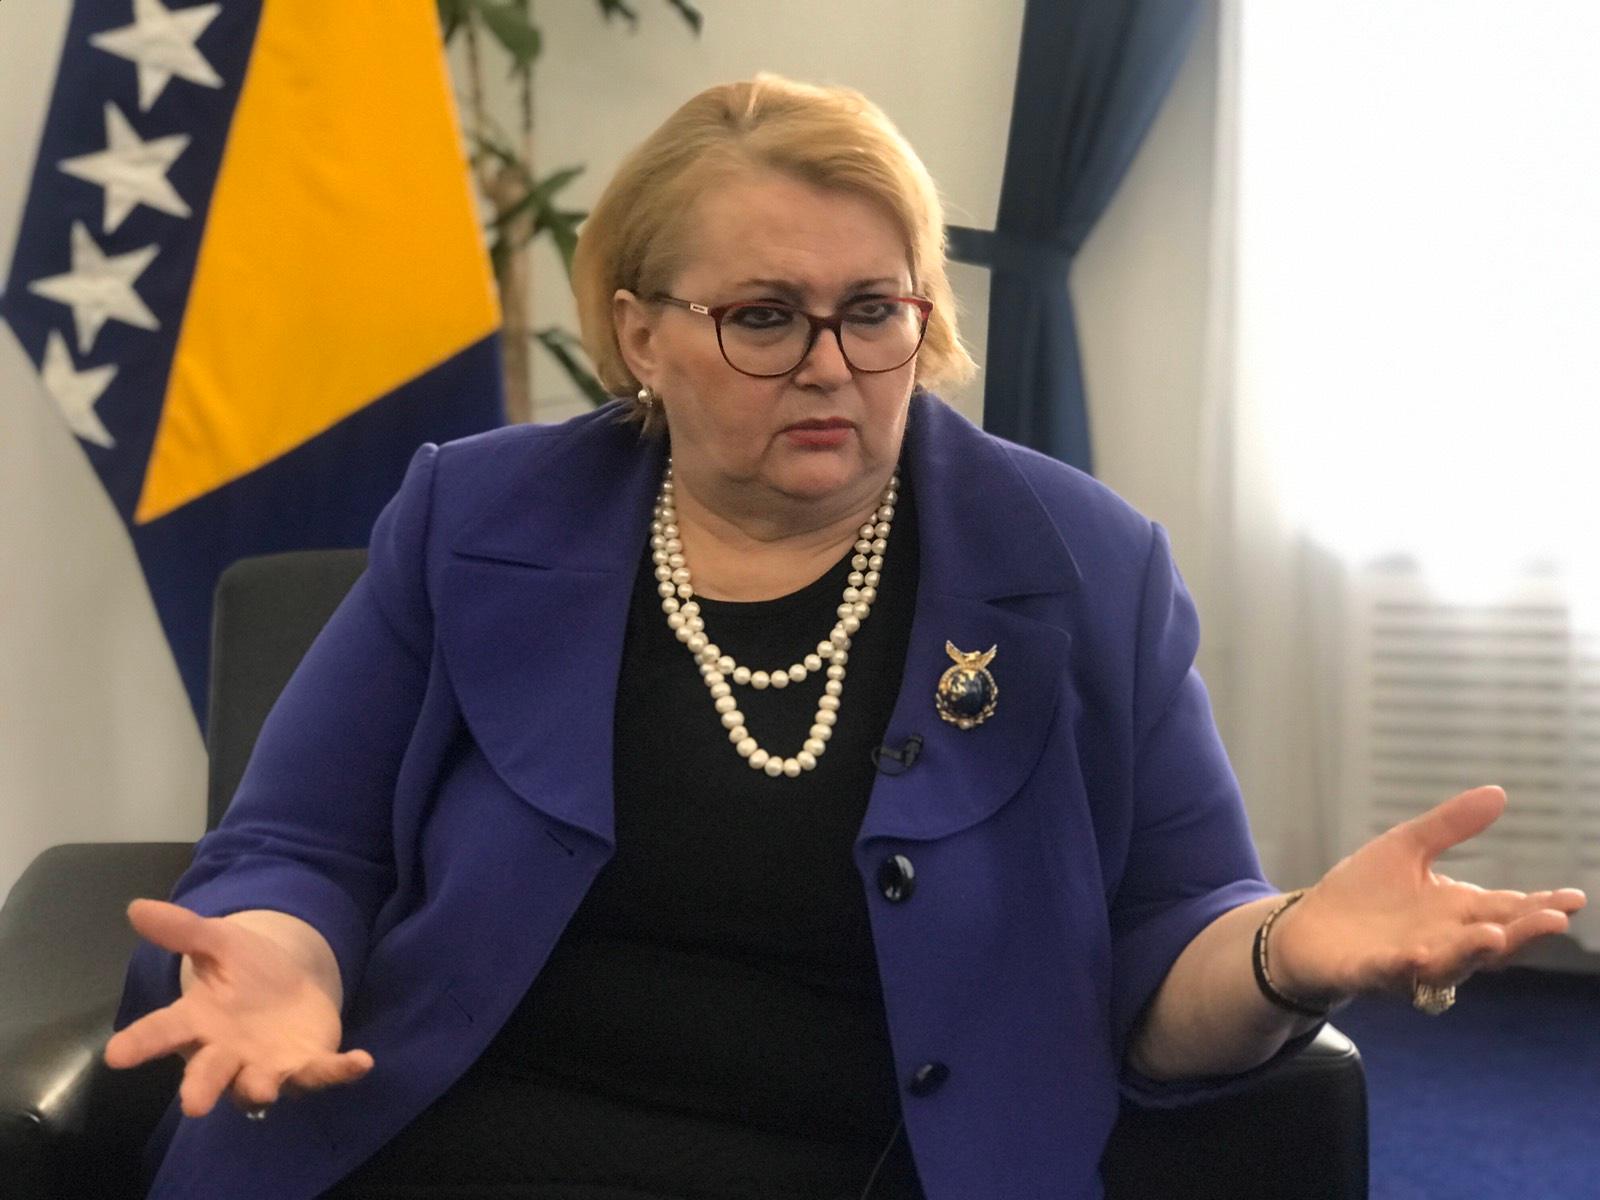 Turković to diplomatic network: Protect fundamental constitutional principles